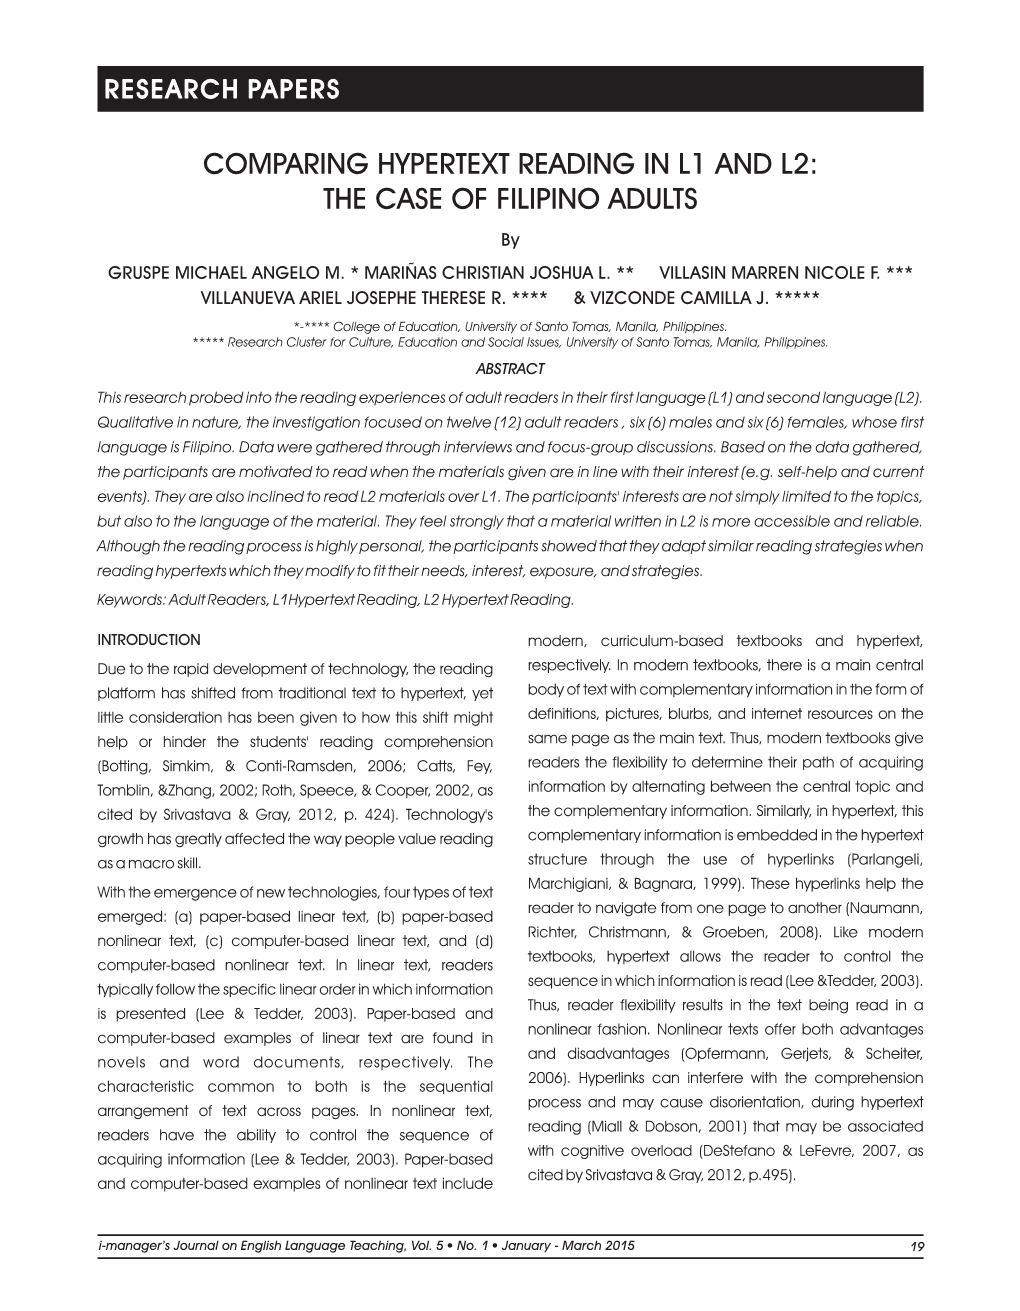 Comparing Hypertext Reading in L1 and L2: the Case of Filipino Adults